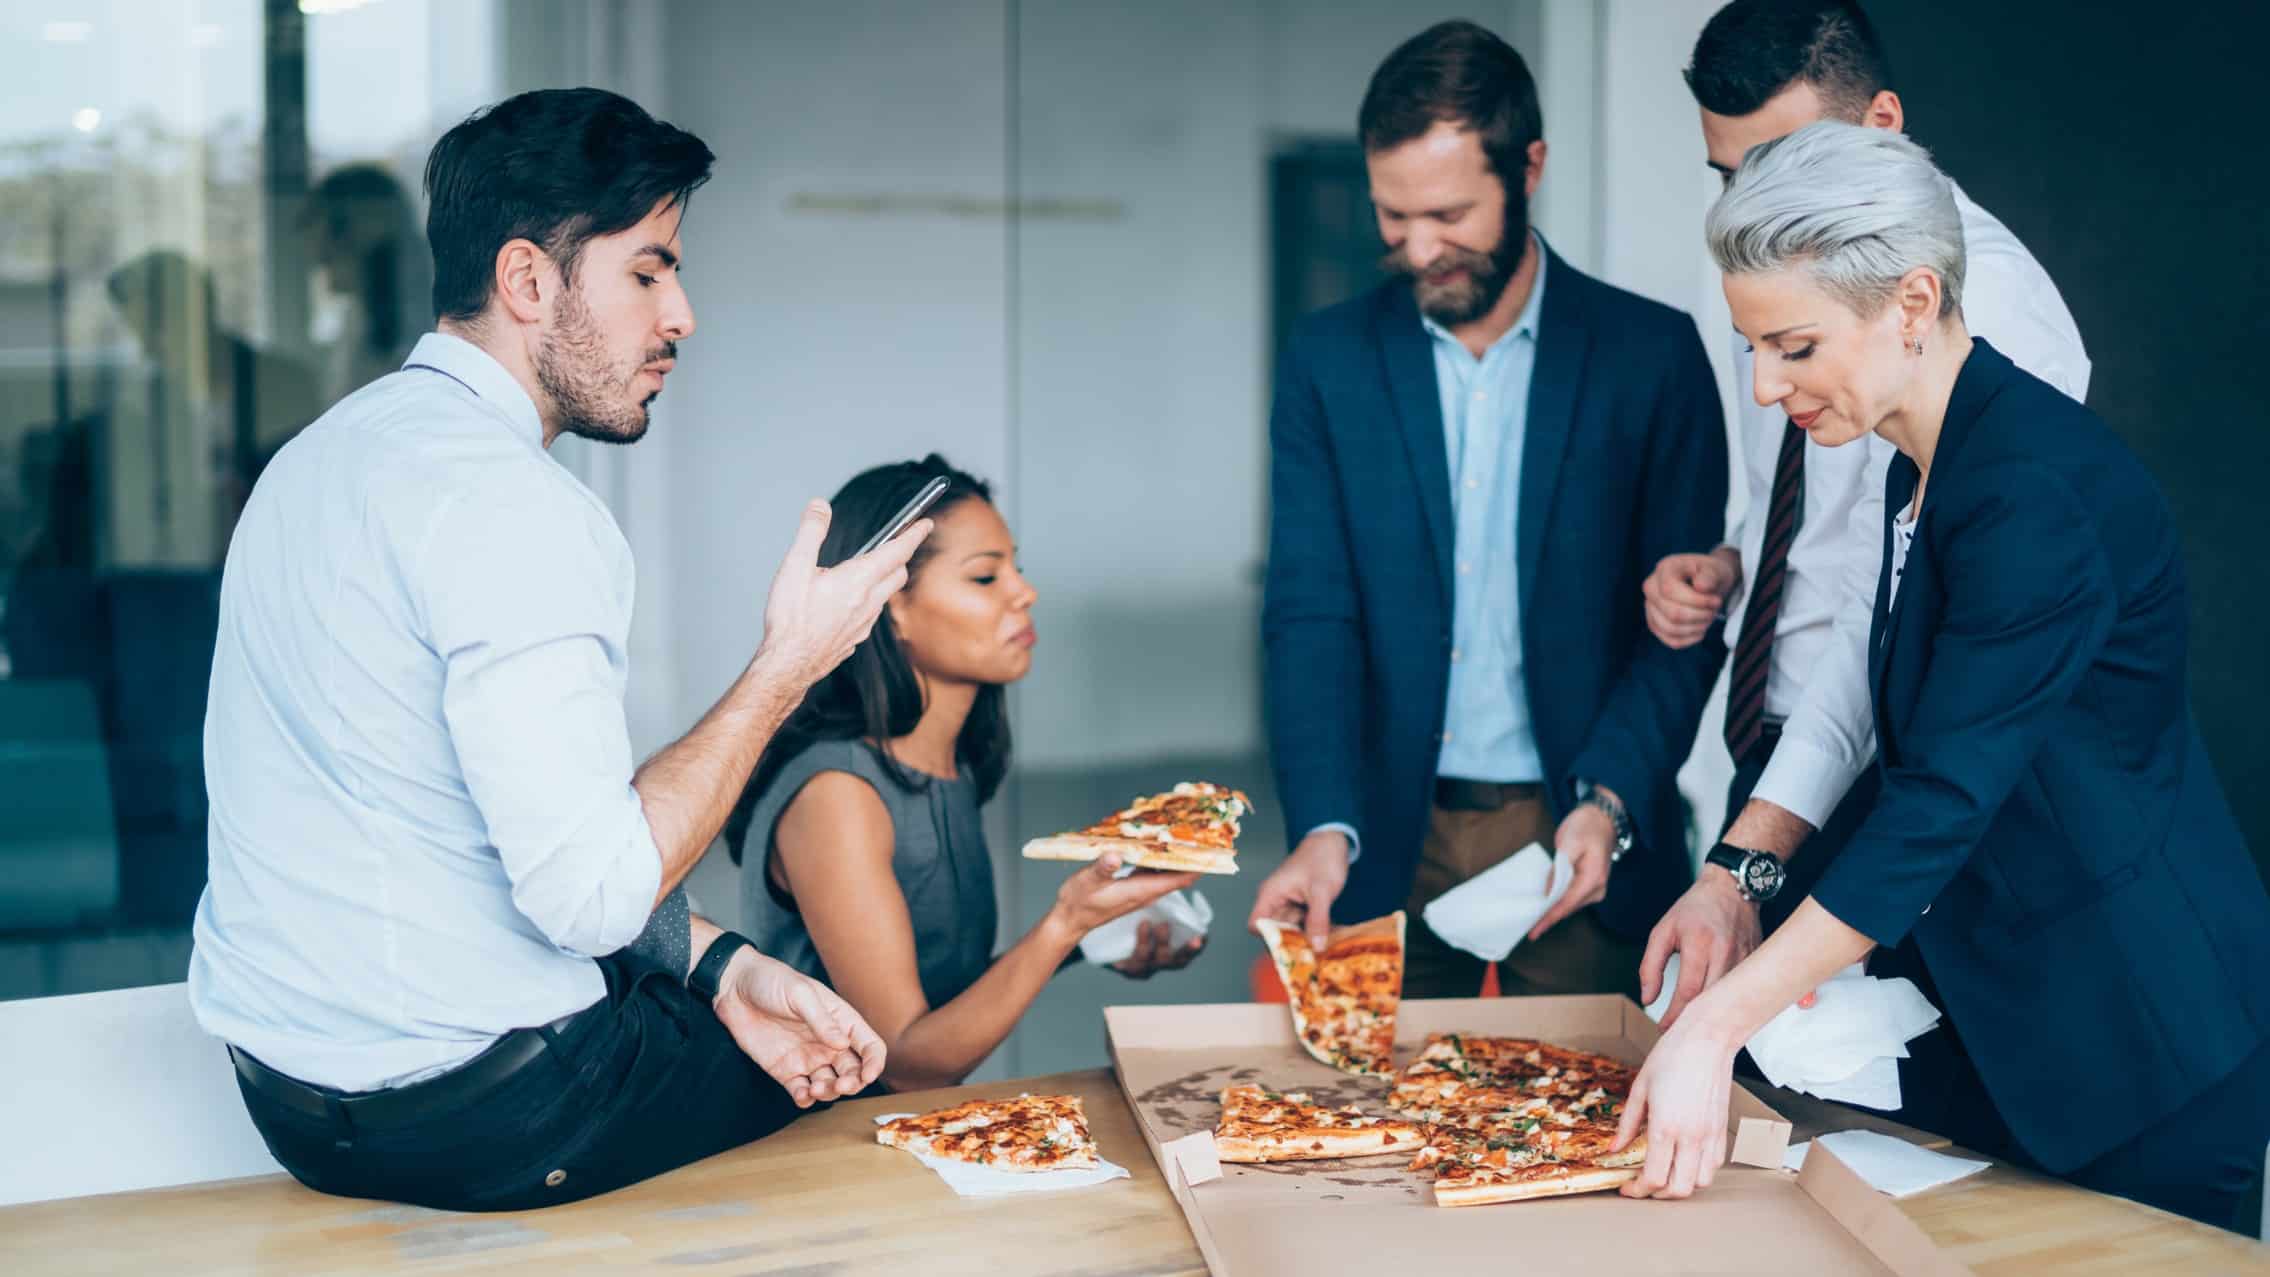 A team in a corporate office shares a Domino's pizza while standing around a table chatting